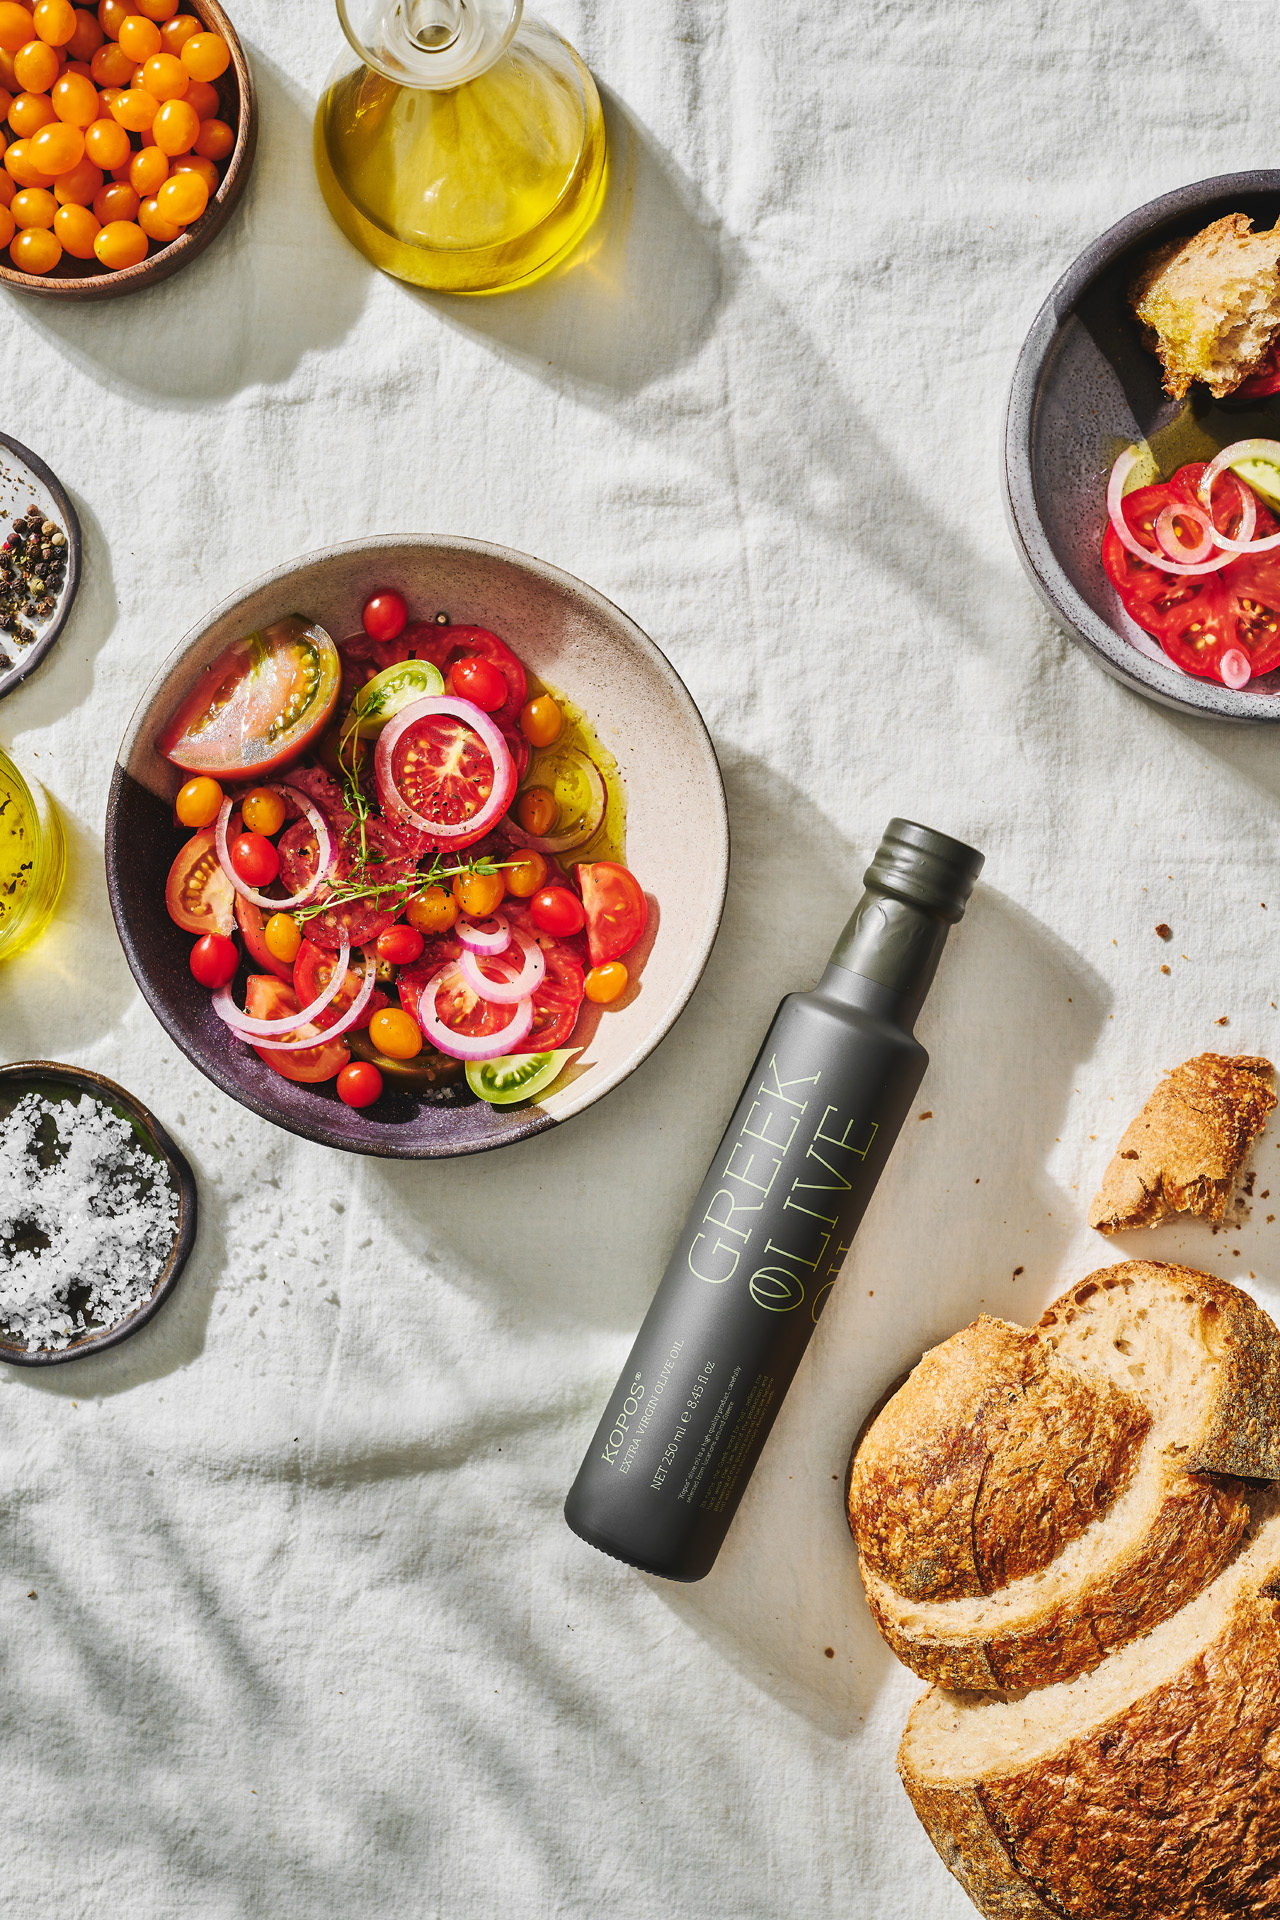 Andriotis Greek Olive Oil table with kopos glass bottle and tomato salad